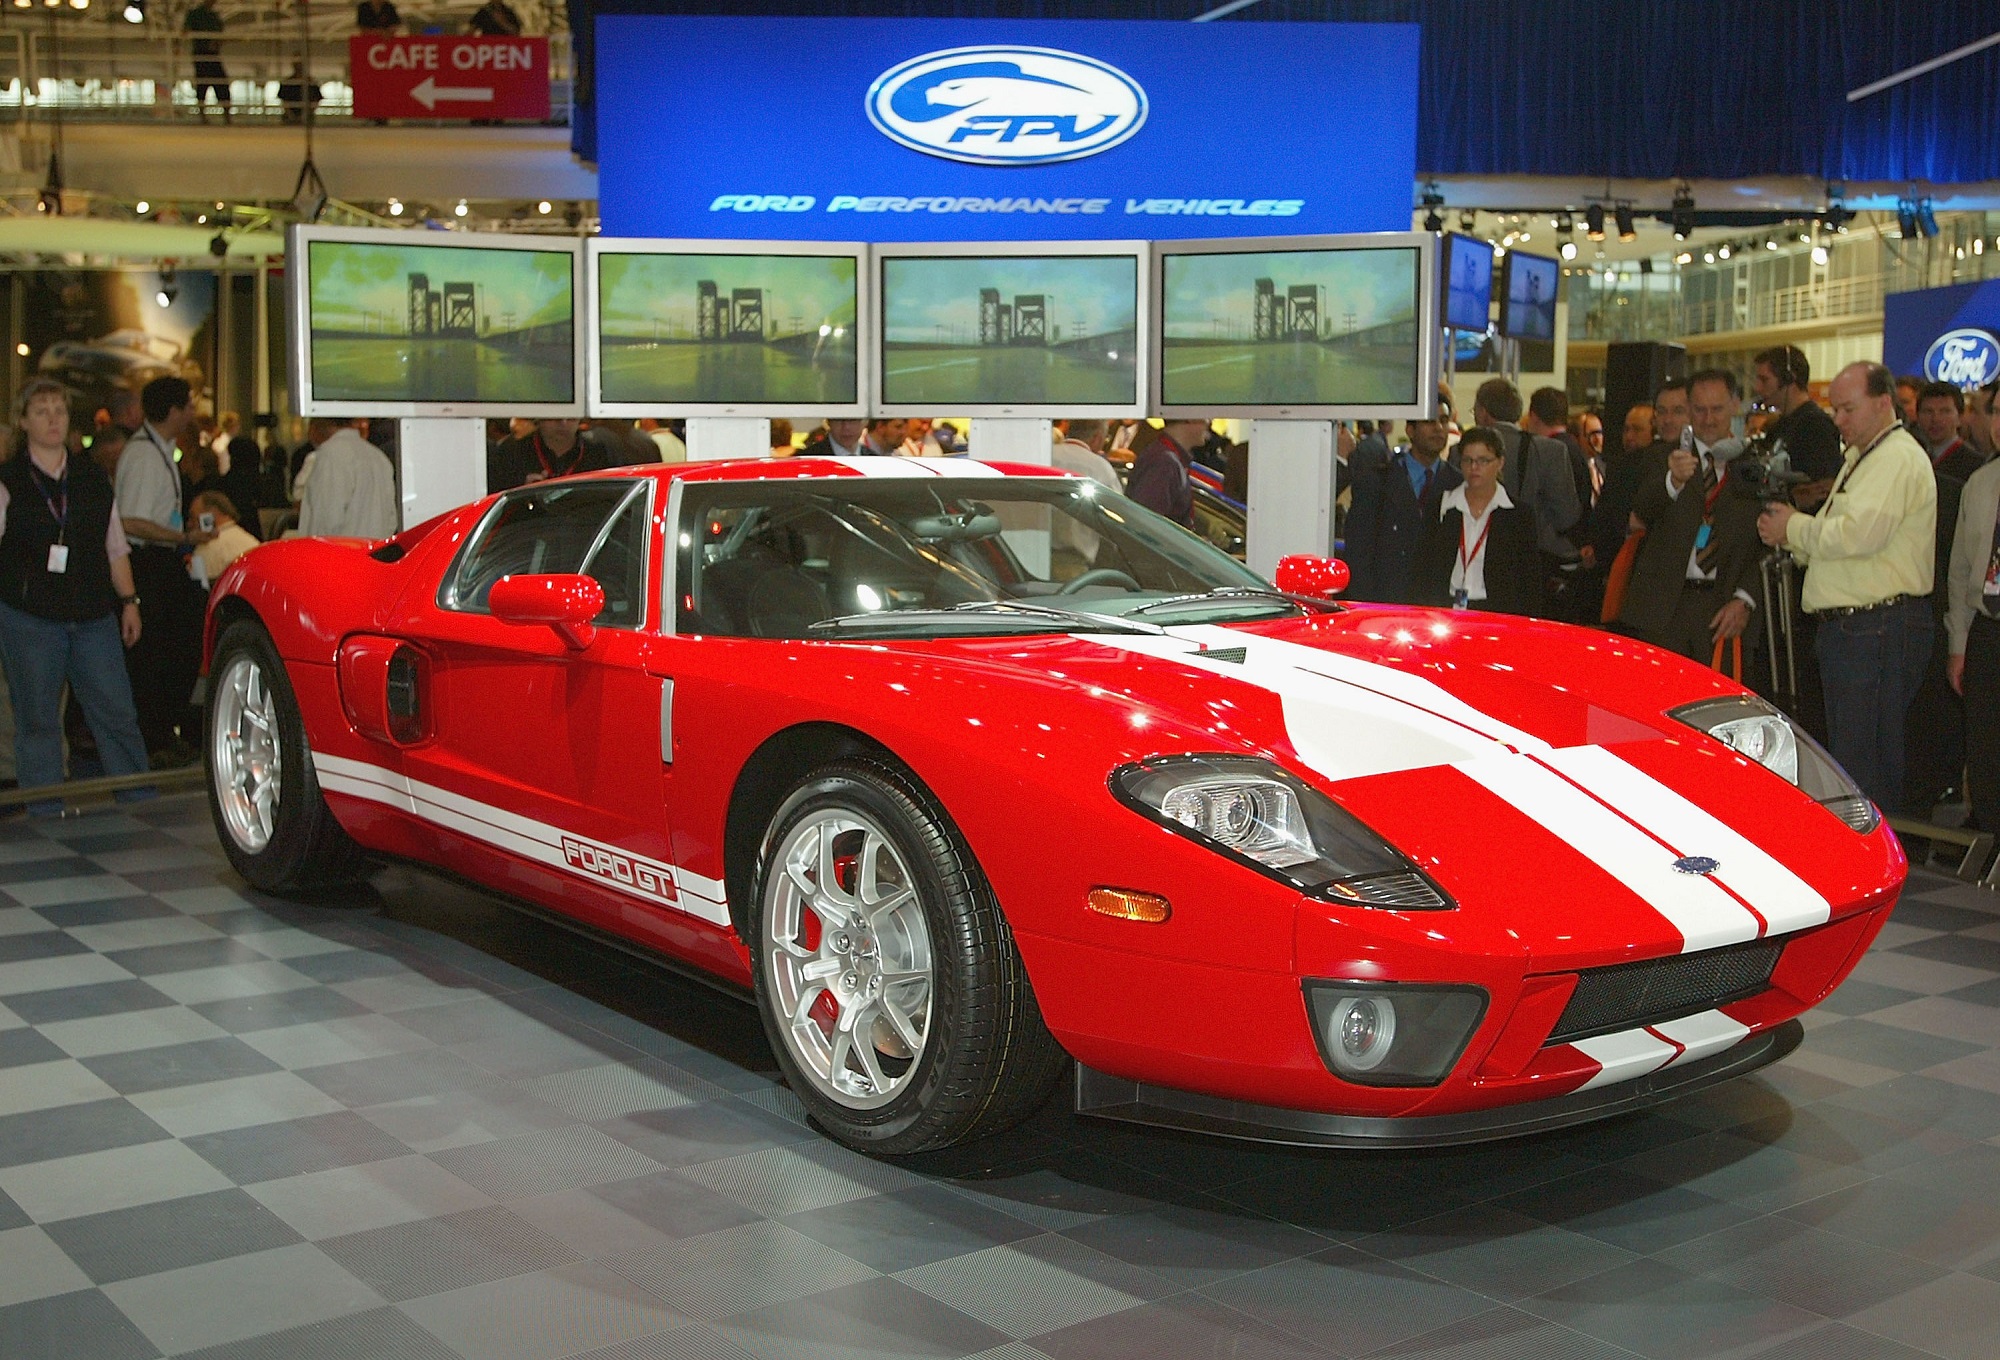 The Ford GT is one of the coolest SVT cars ever, along with the SVT Cobra Terminator and SVT Raptor